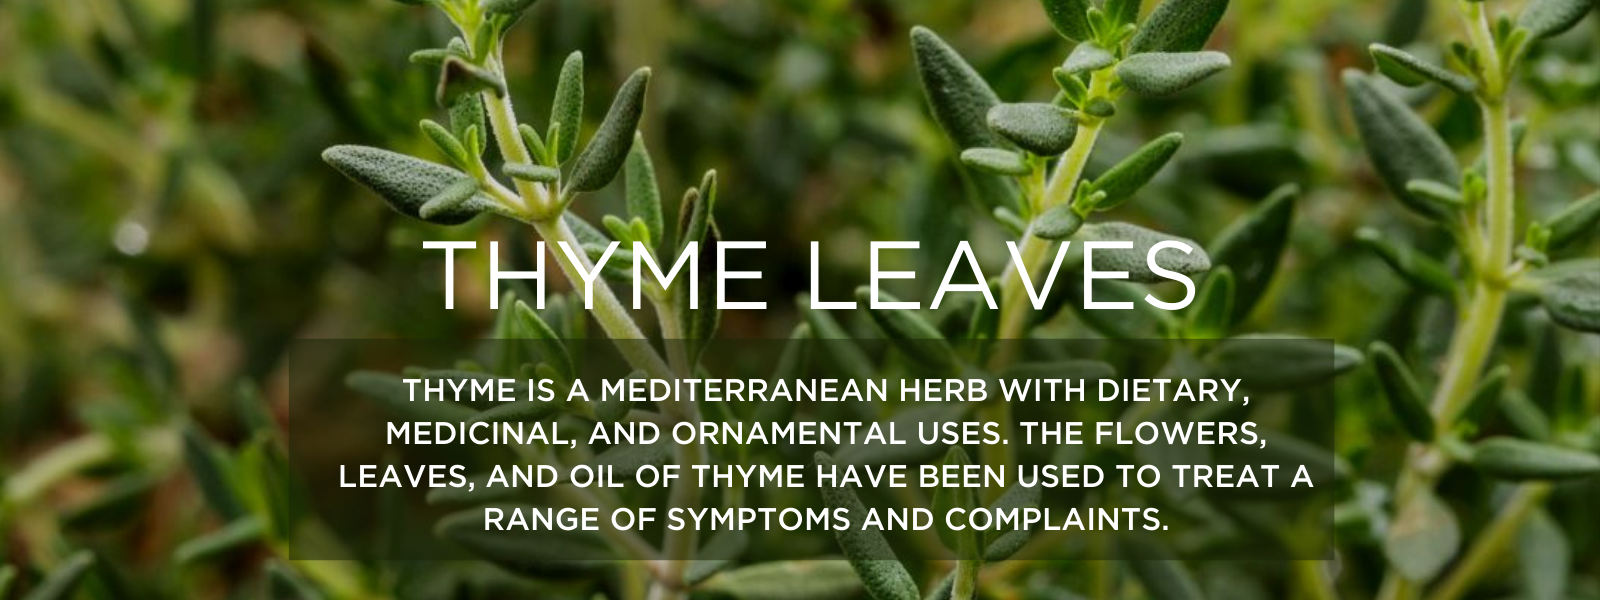 Thyme leaves- Health Benefits, Uses and Important Facts